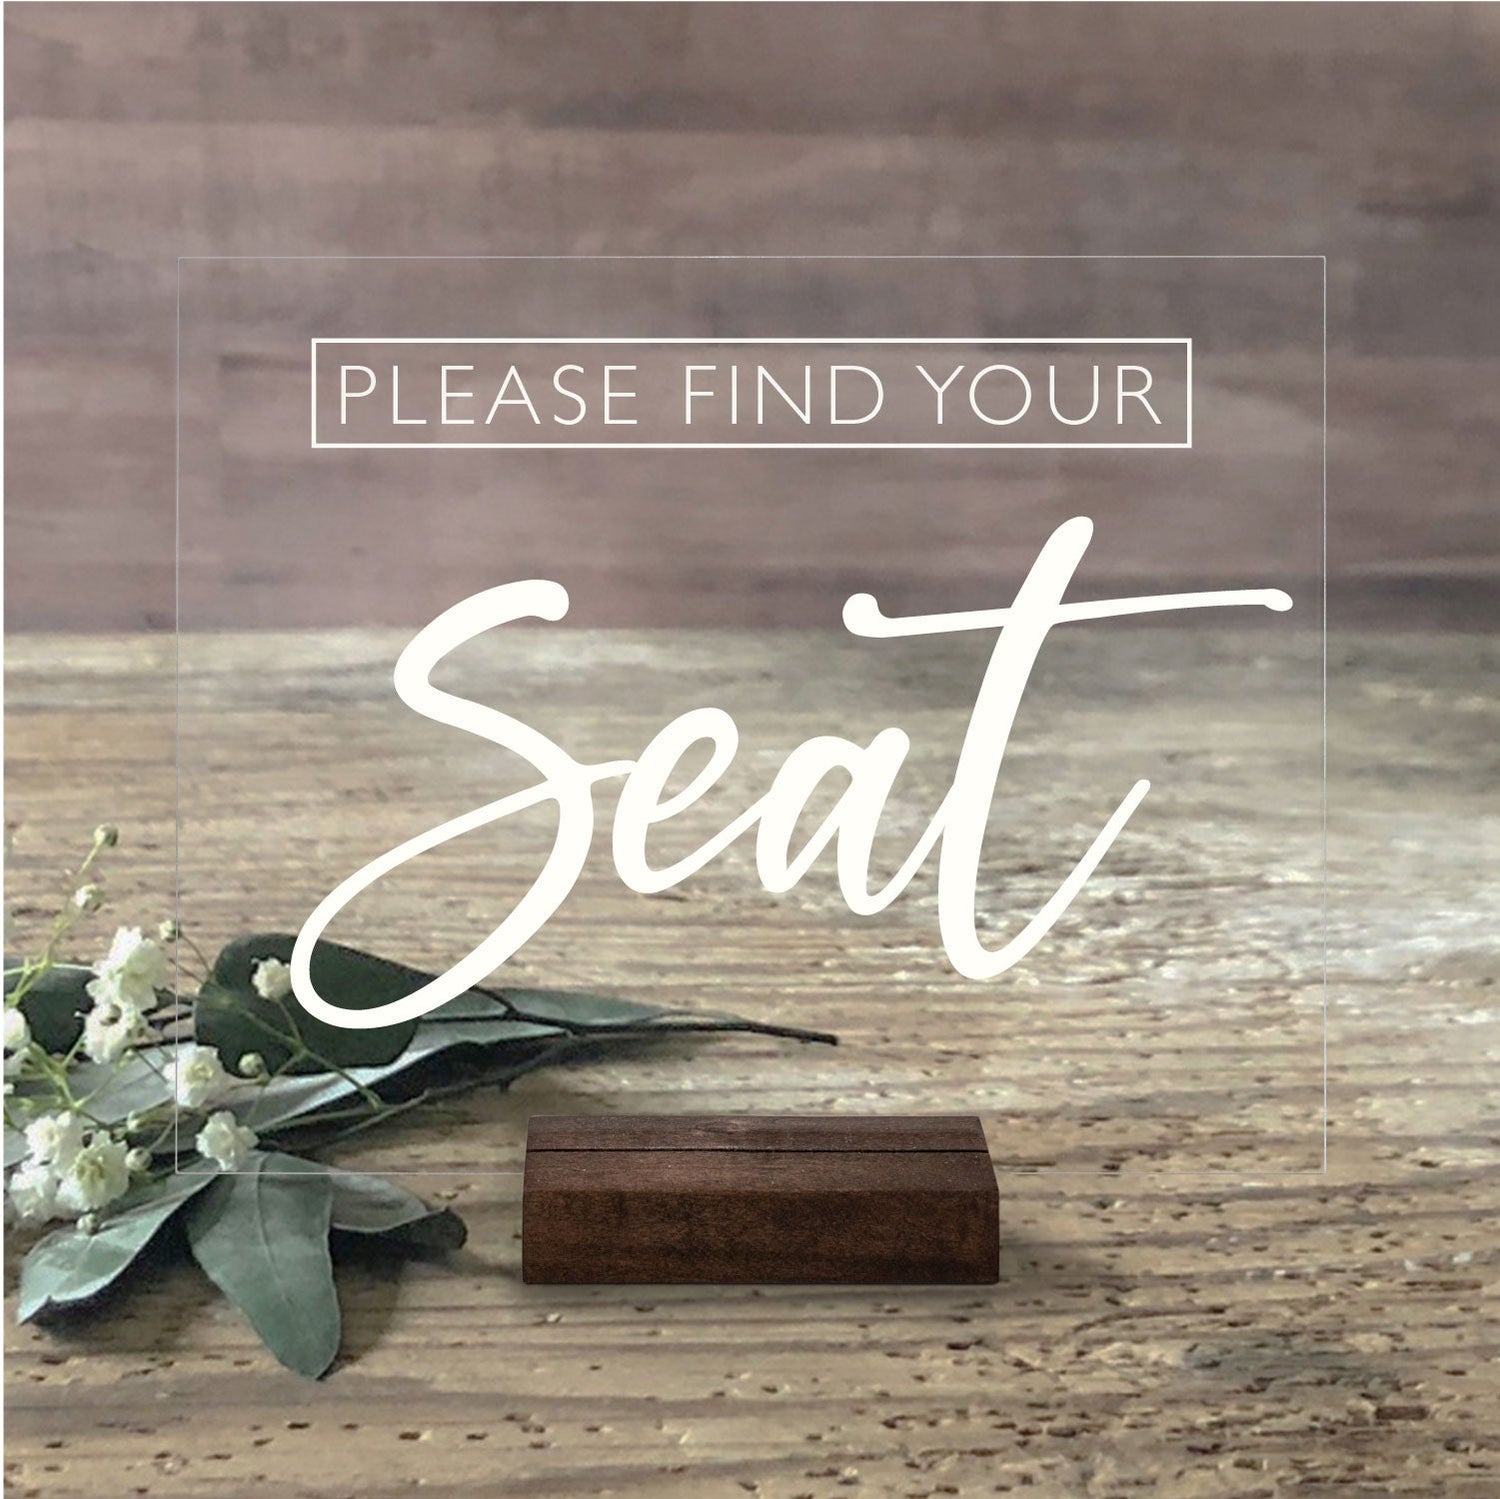 Find Your Seat Sign | Acrylic Wedding Decor | SCC-53 - SCC Signs